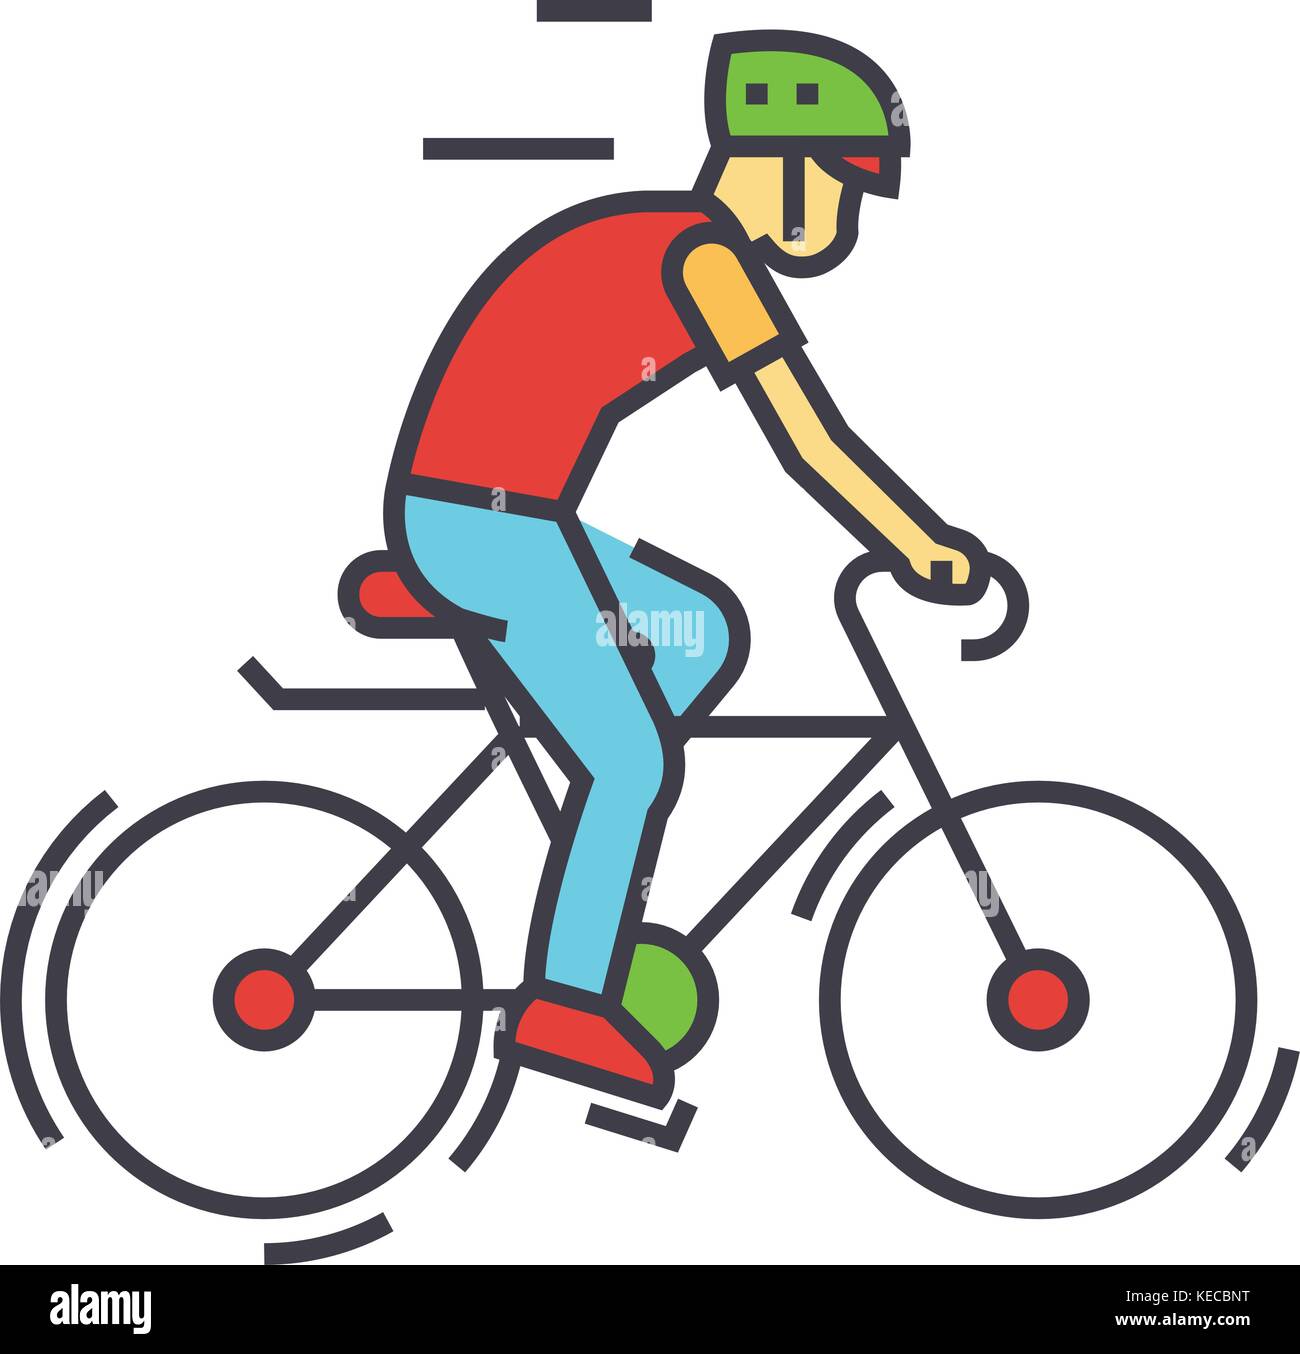 Cyclists, sport bikes, bicycling, bycicle man, cycling competition, race concept. Line vector icon. Editable stroke. Flat linear illustration isolated on white background Stock Vector